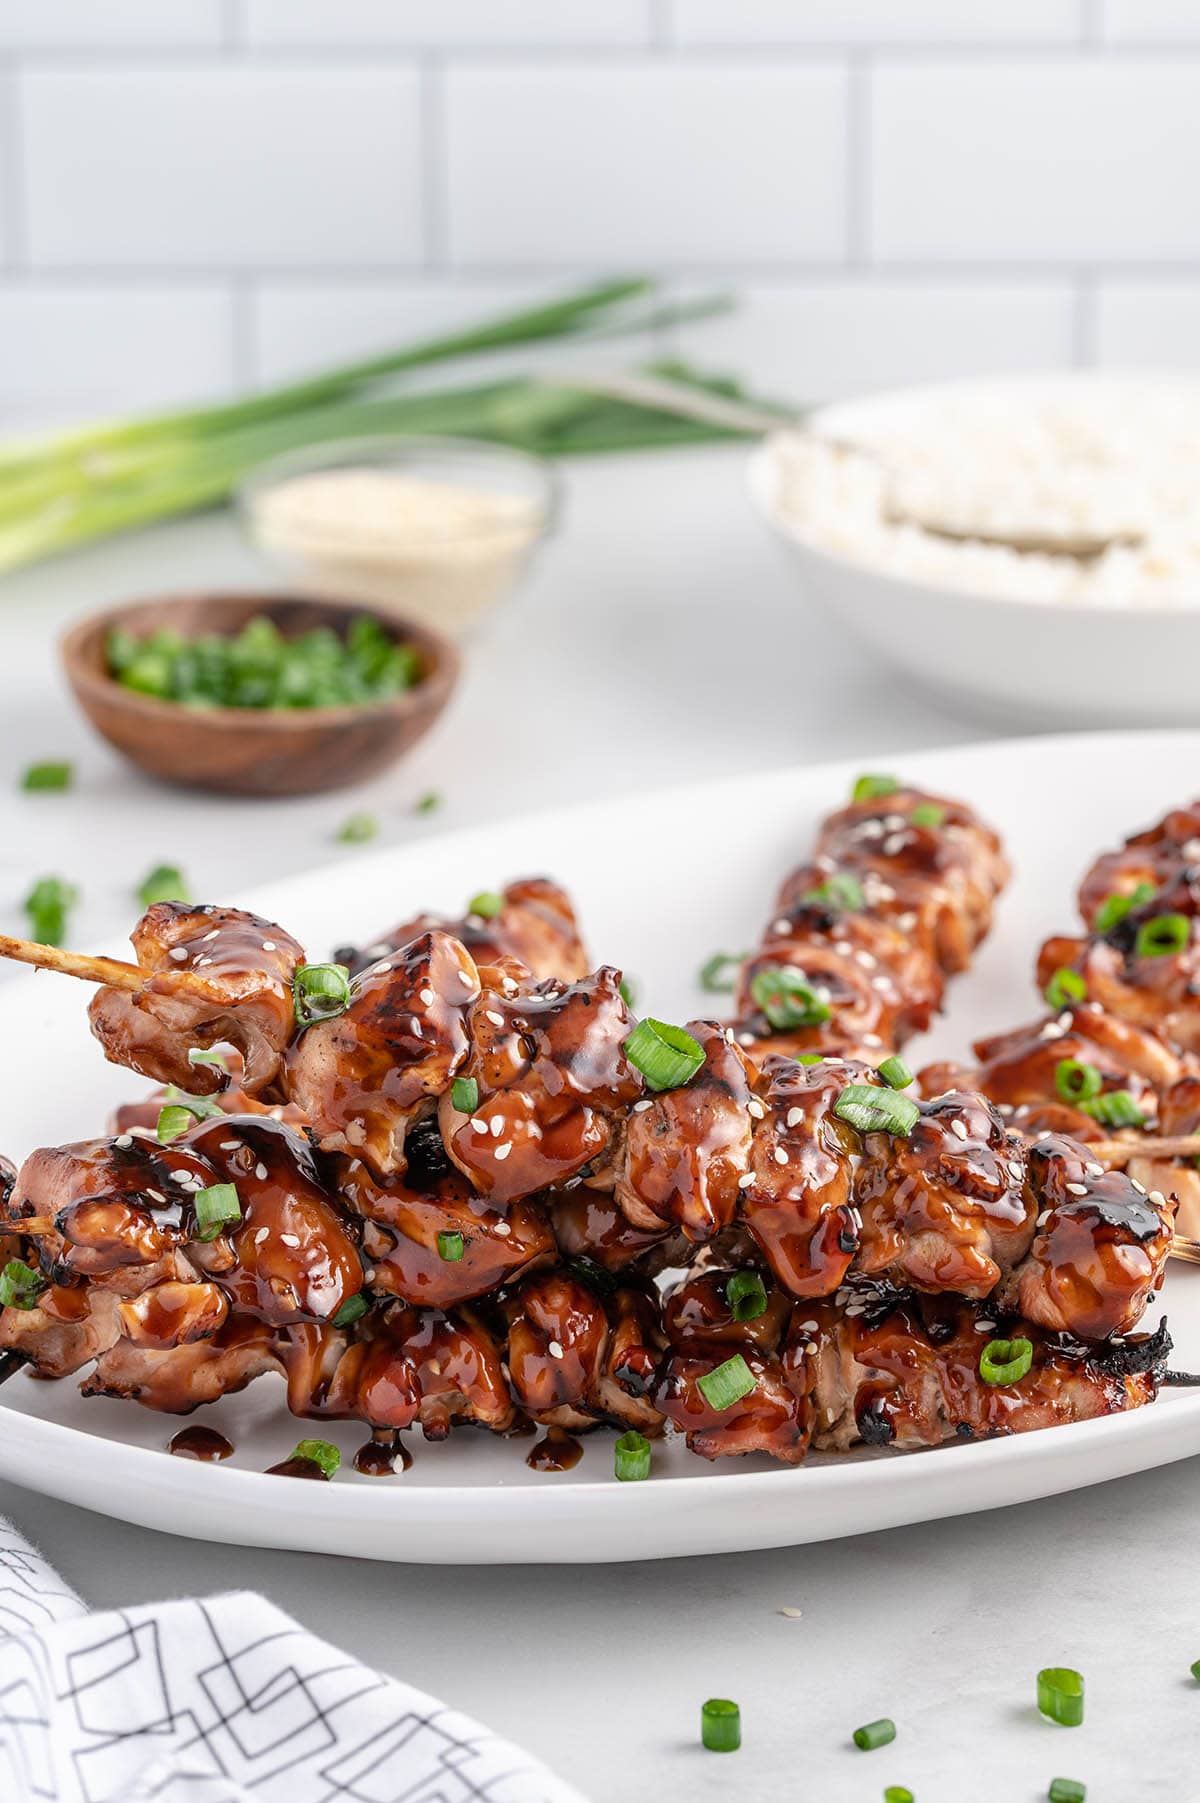 Teriyaki Chicken Skewers with green onion and sesame seed